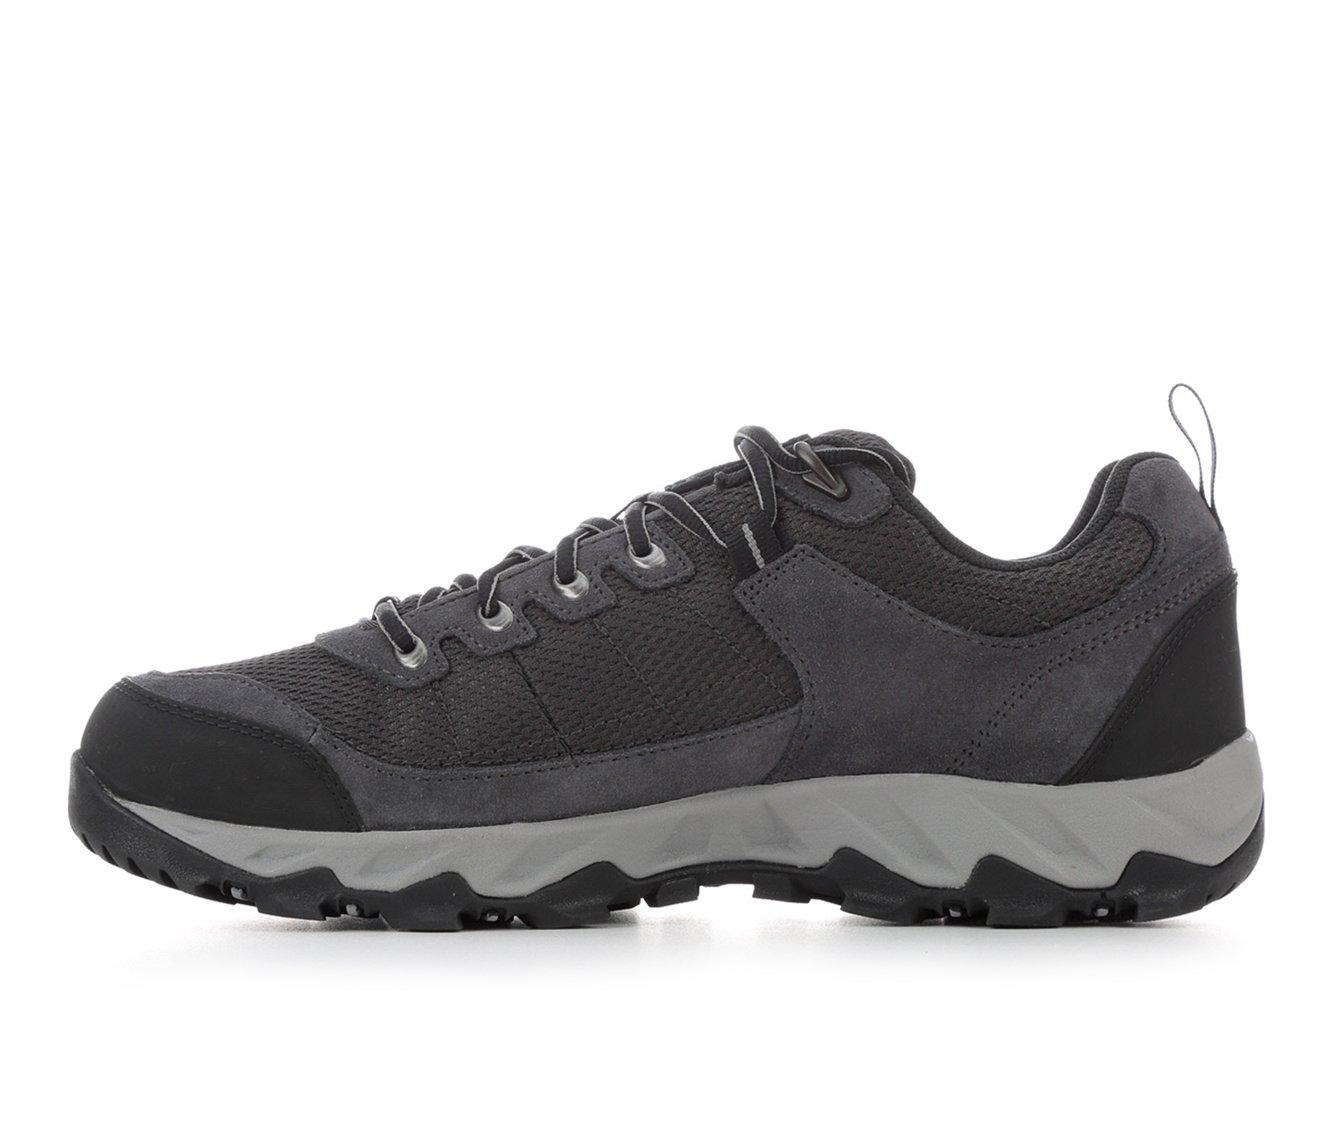 Men's Columbia Valley Pointe Low Waterproof Hiking Shoes | Shoe Carnival